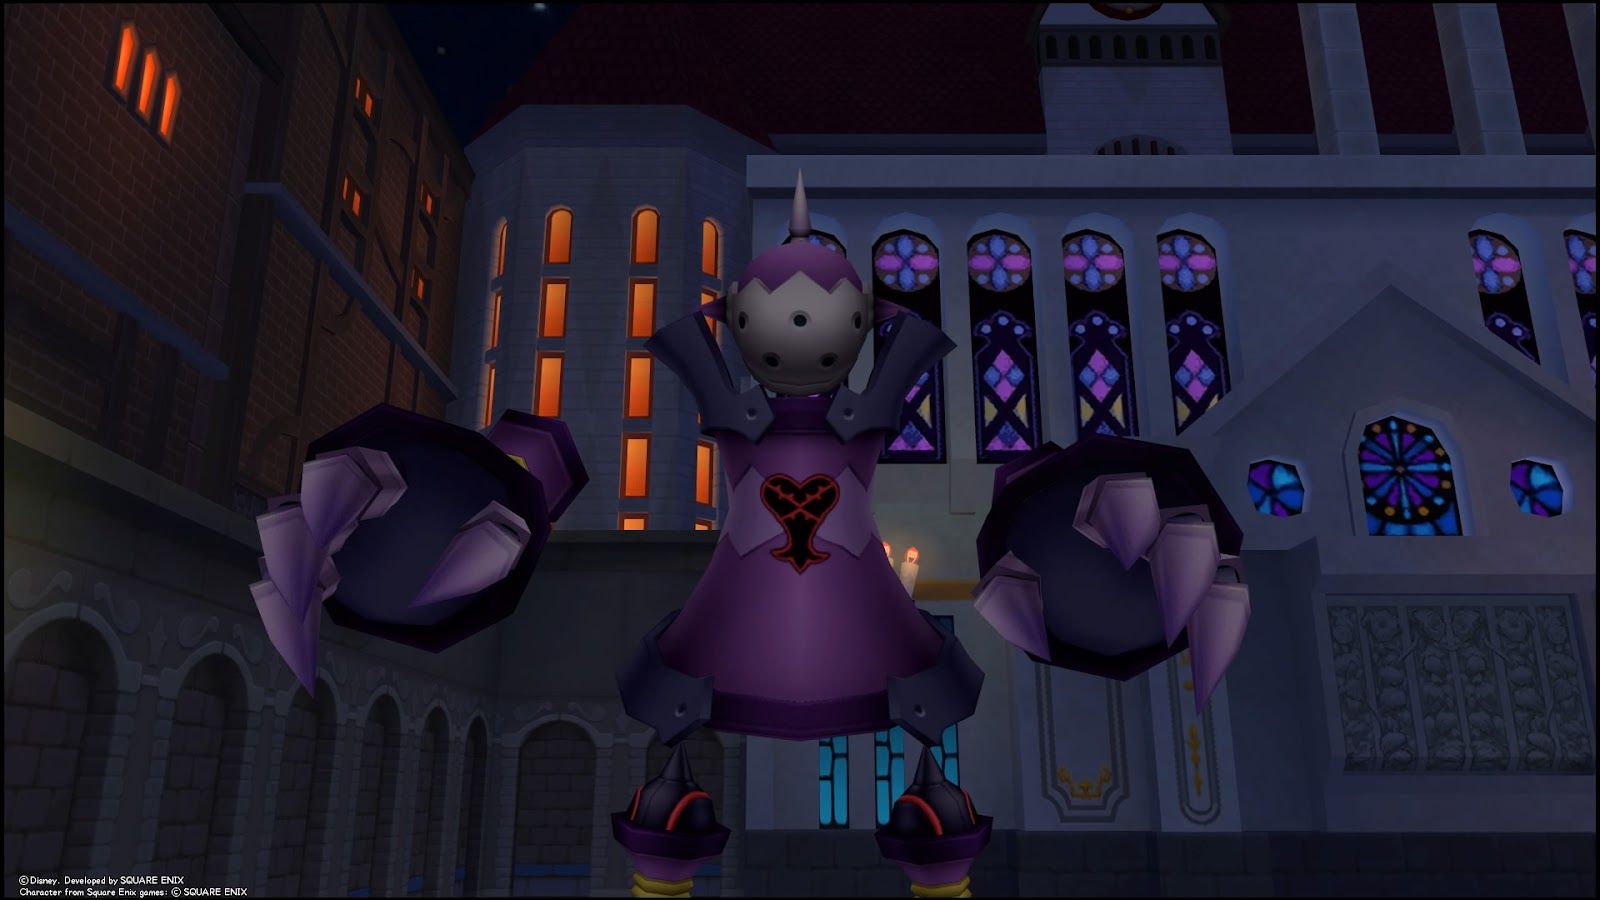 Guard Armor is fought in the same arena as he was in Kingdom Hearts | Kingdom Hearts Re:Chain of Memories